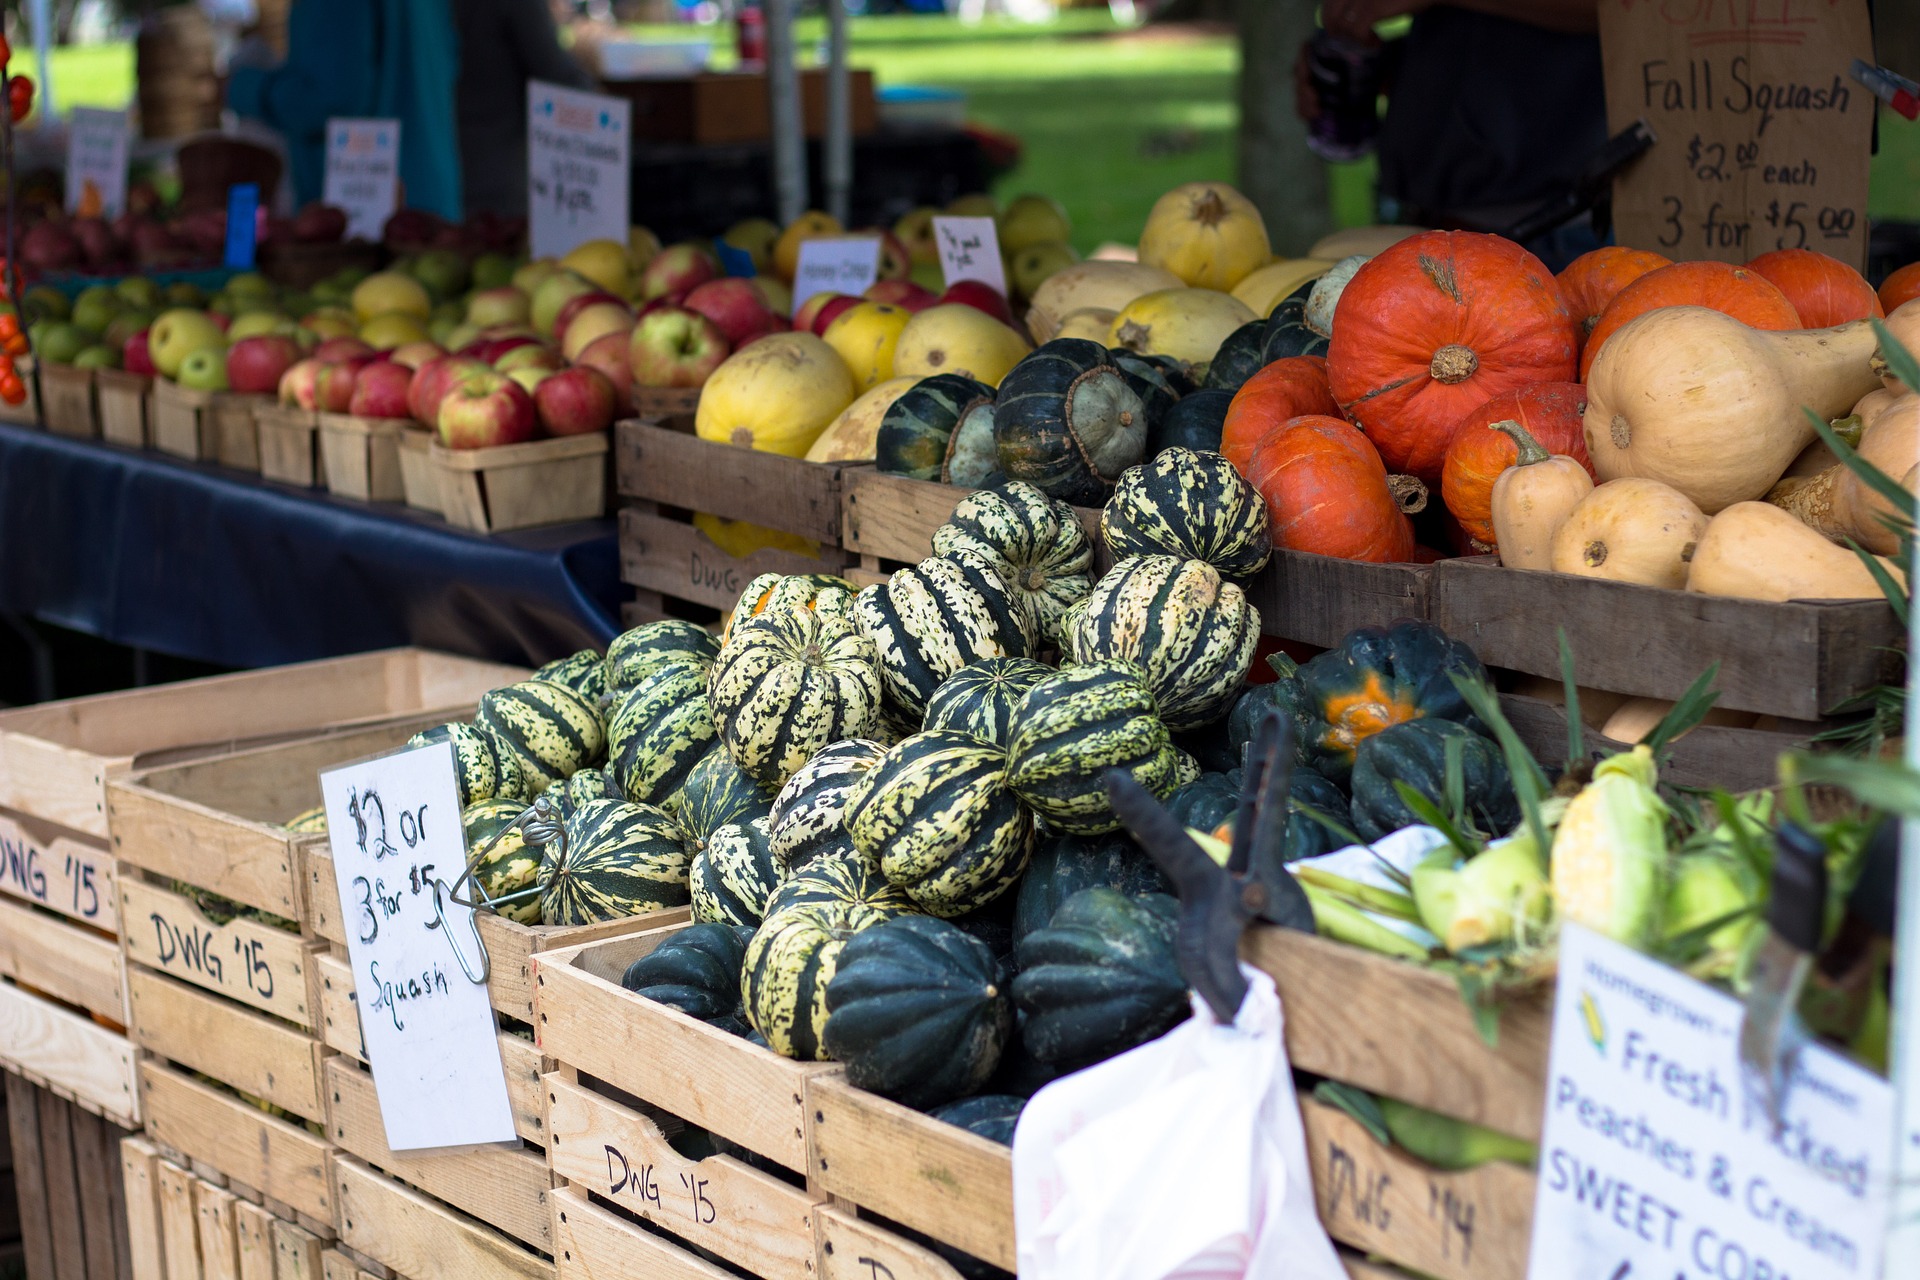 Now on "driving" days, we seek out local farmers markets to stock up on fresh fruits and veggies.